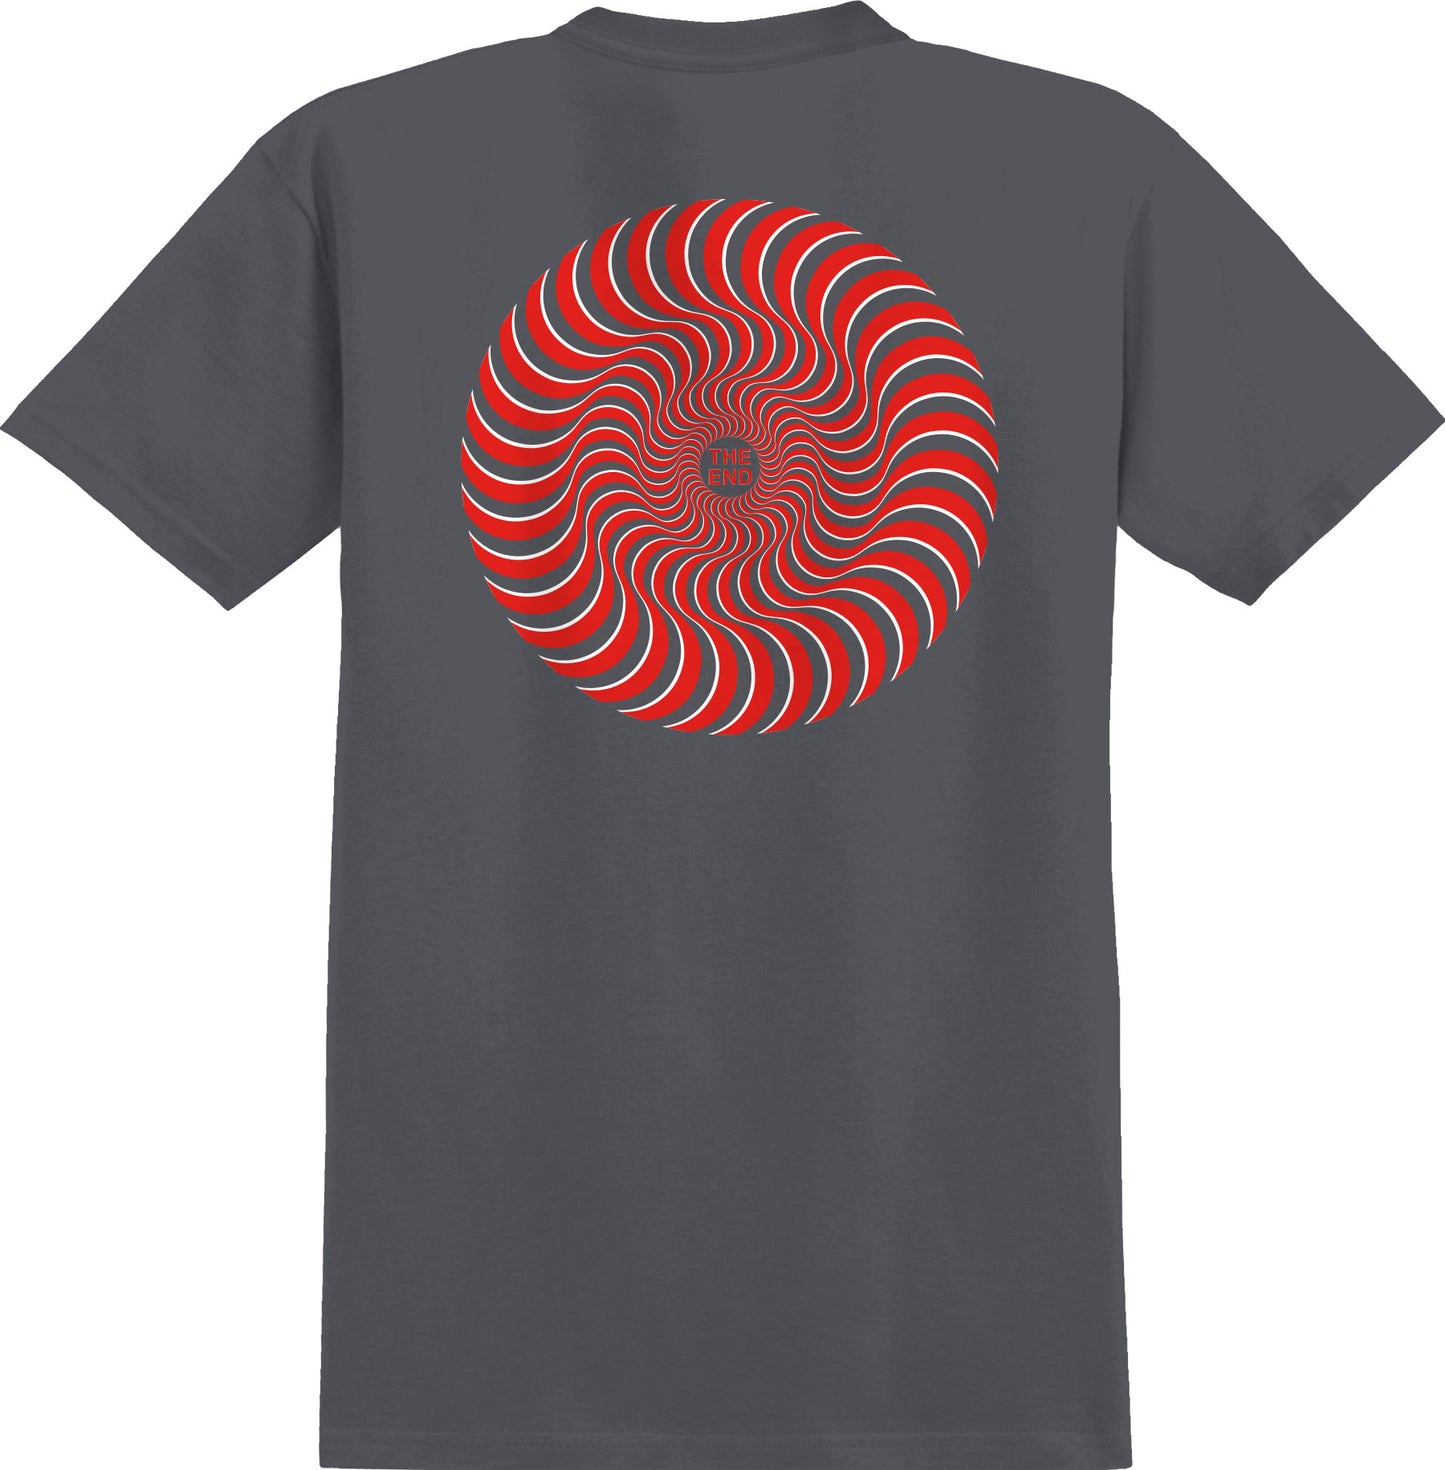 SPITFIRE - CLASSIC SWIRL OVERLAY YOUTH TEE  - CHARCOAL